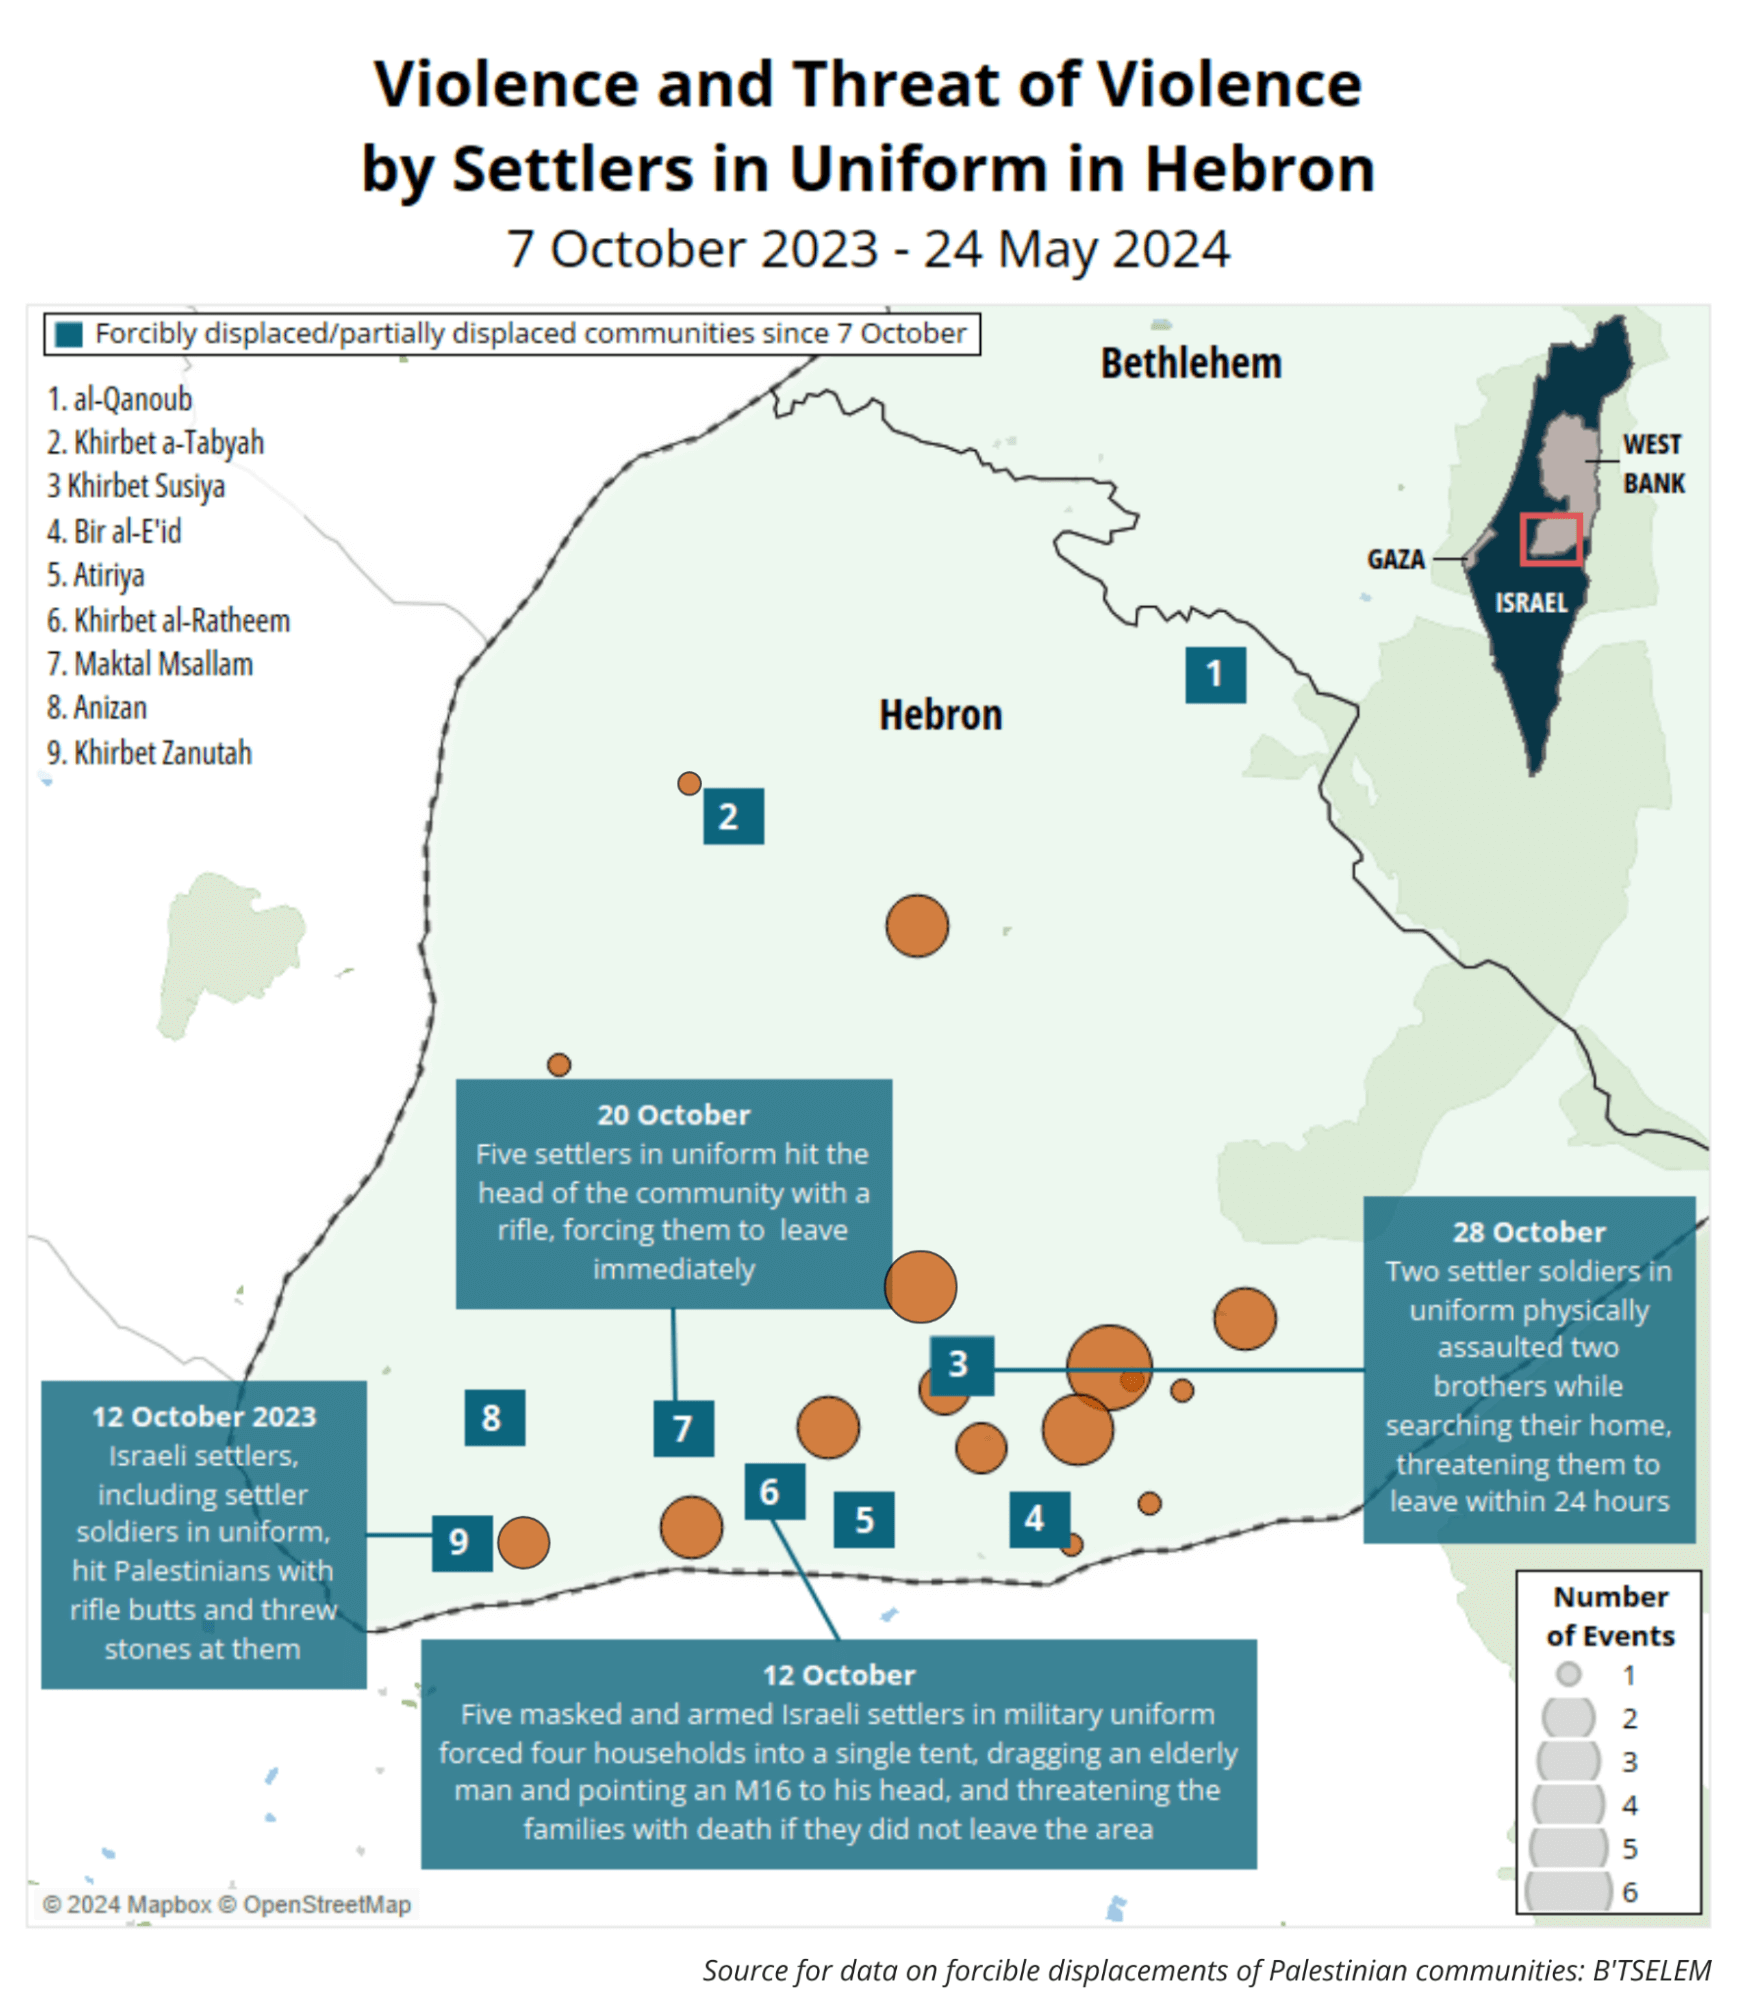 Infographic - Violence and Threat of Violence by Settlers in Uniform in Hebron - 7 October 2023 - 24 May 2024